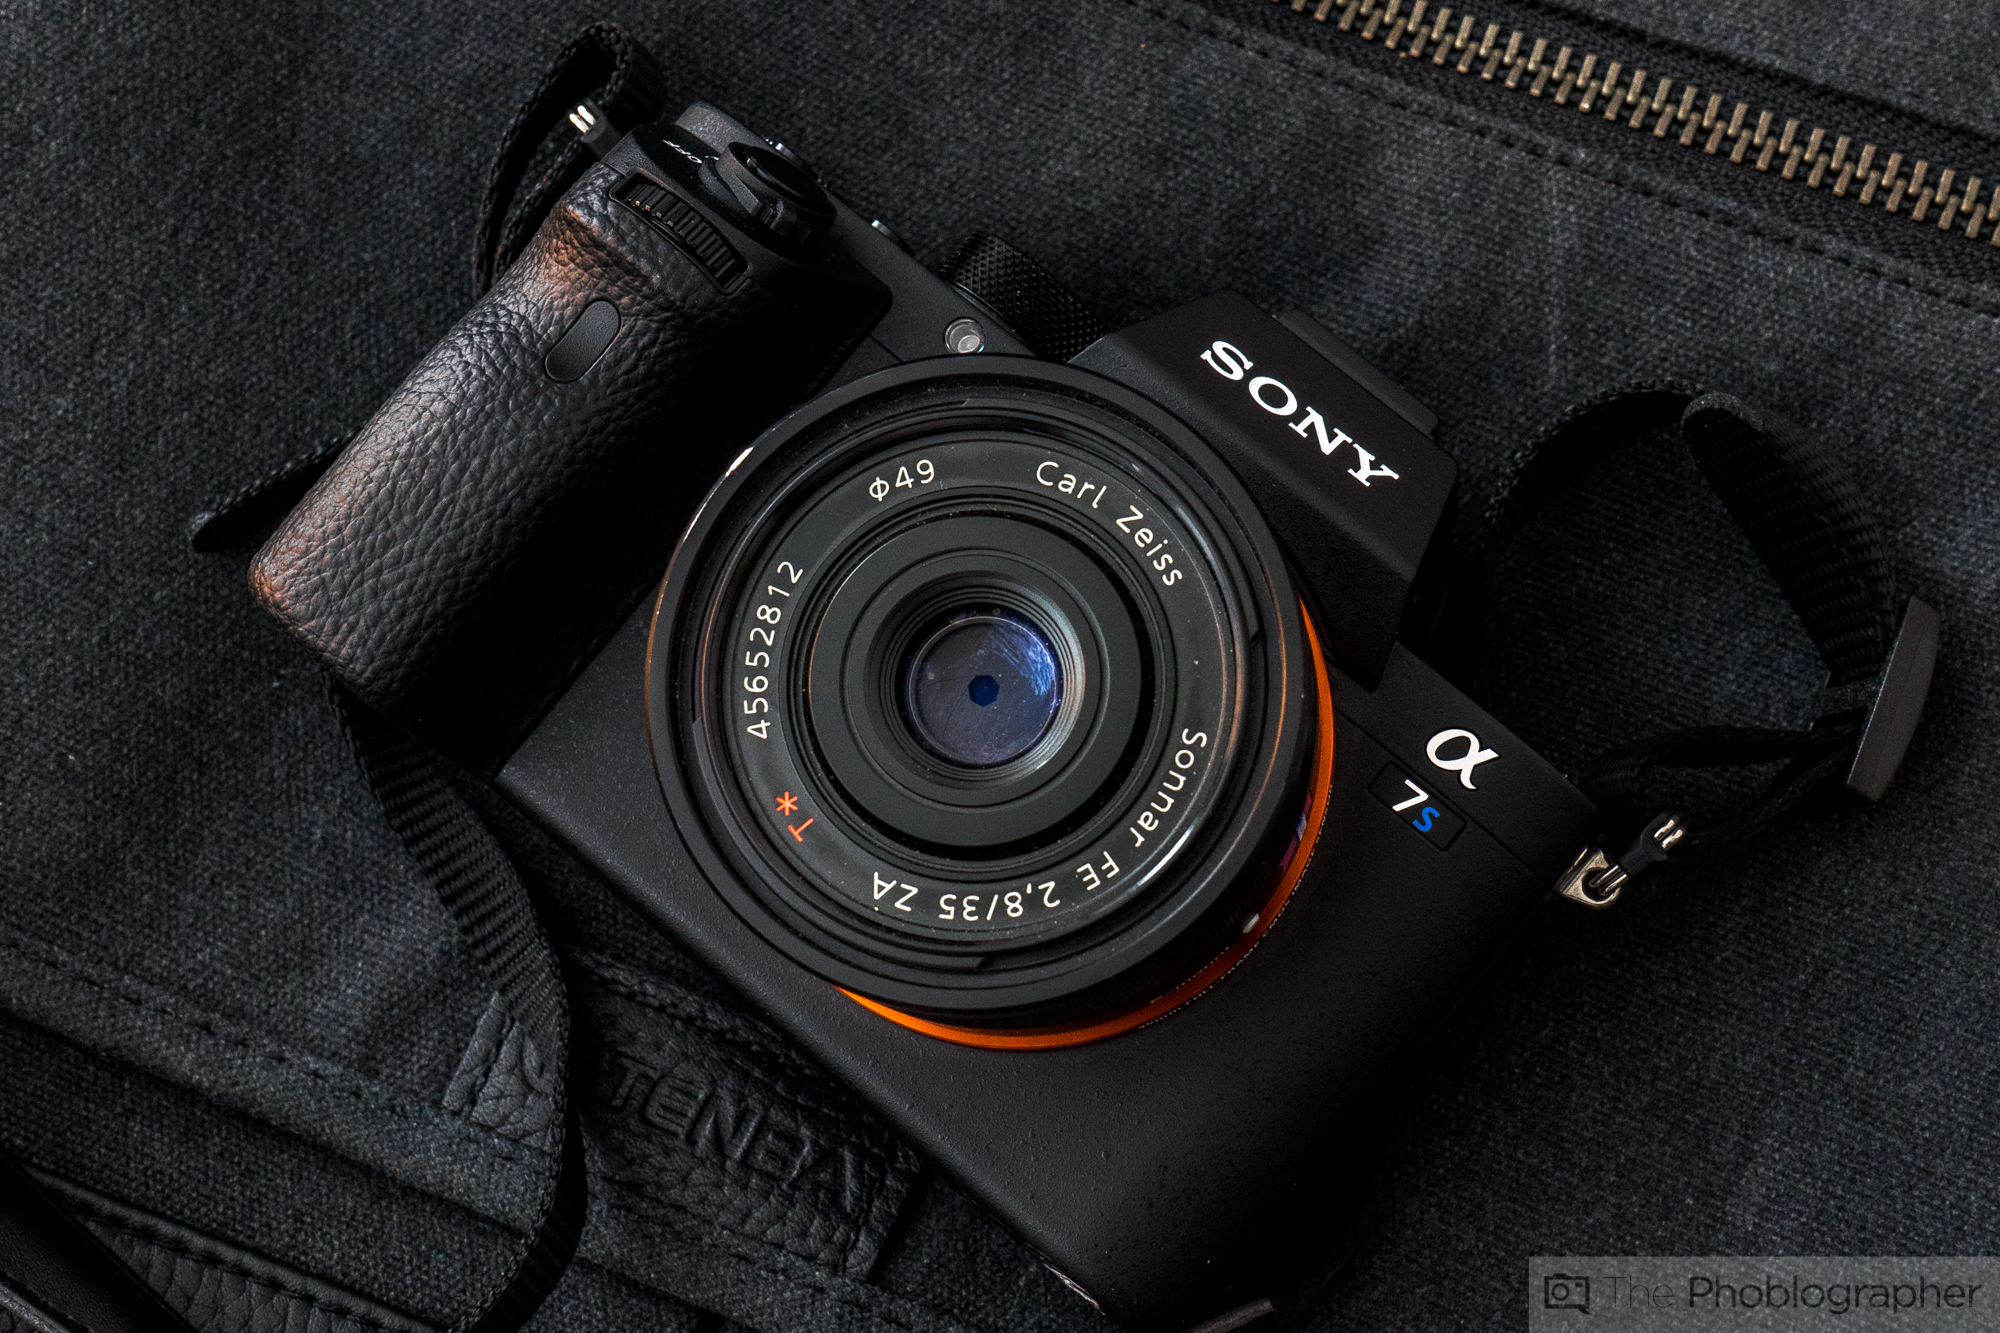 It’s Confirmed: The Sony A7S III Is Coming, but “Will Take Time”